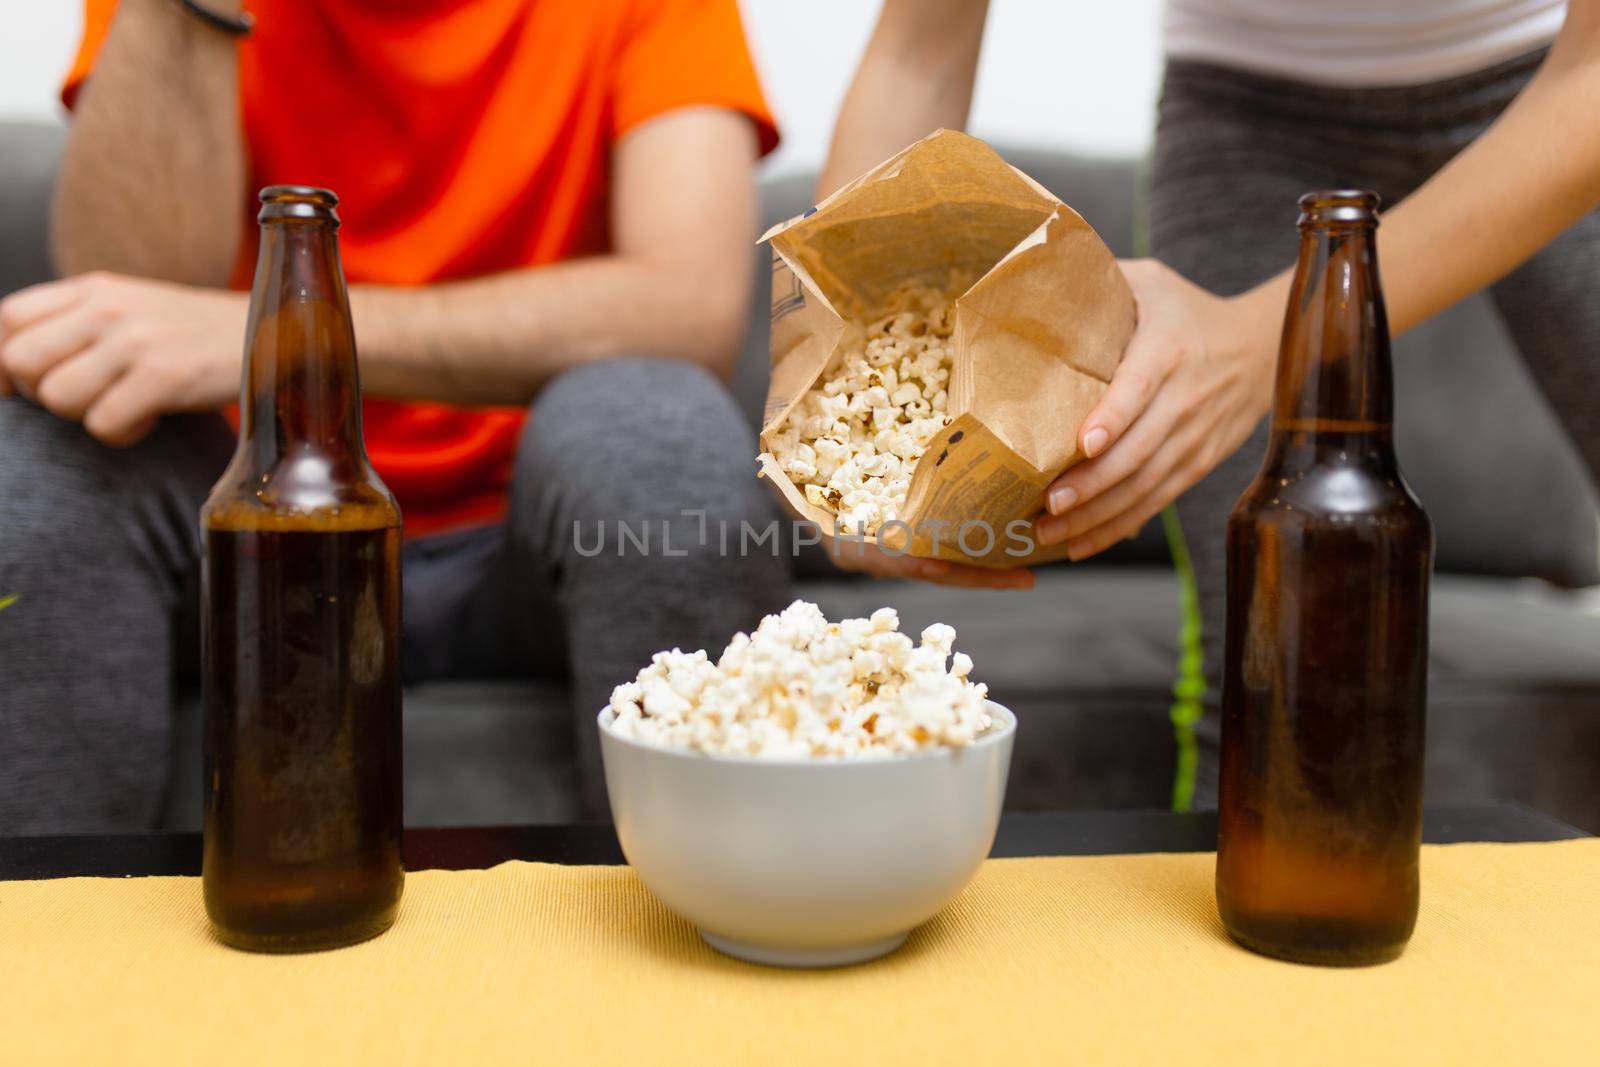 abstract couple watching sports game on tv. girl puts more popcorn